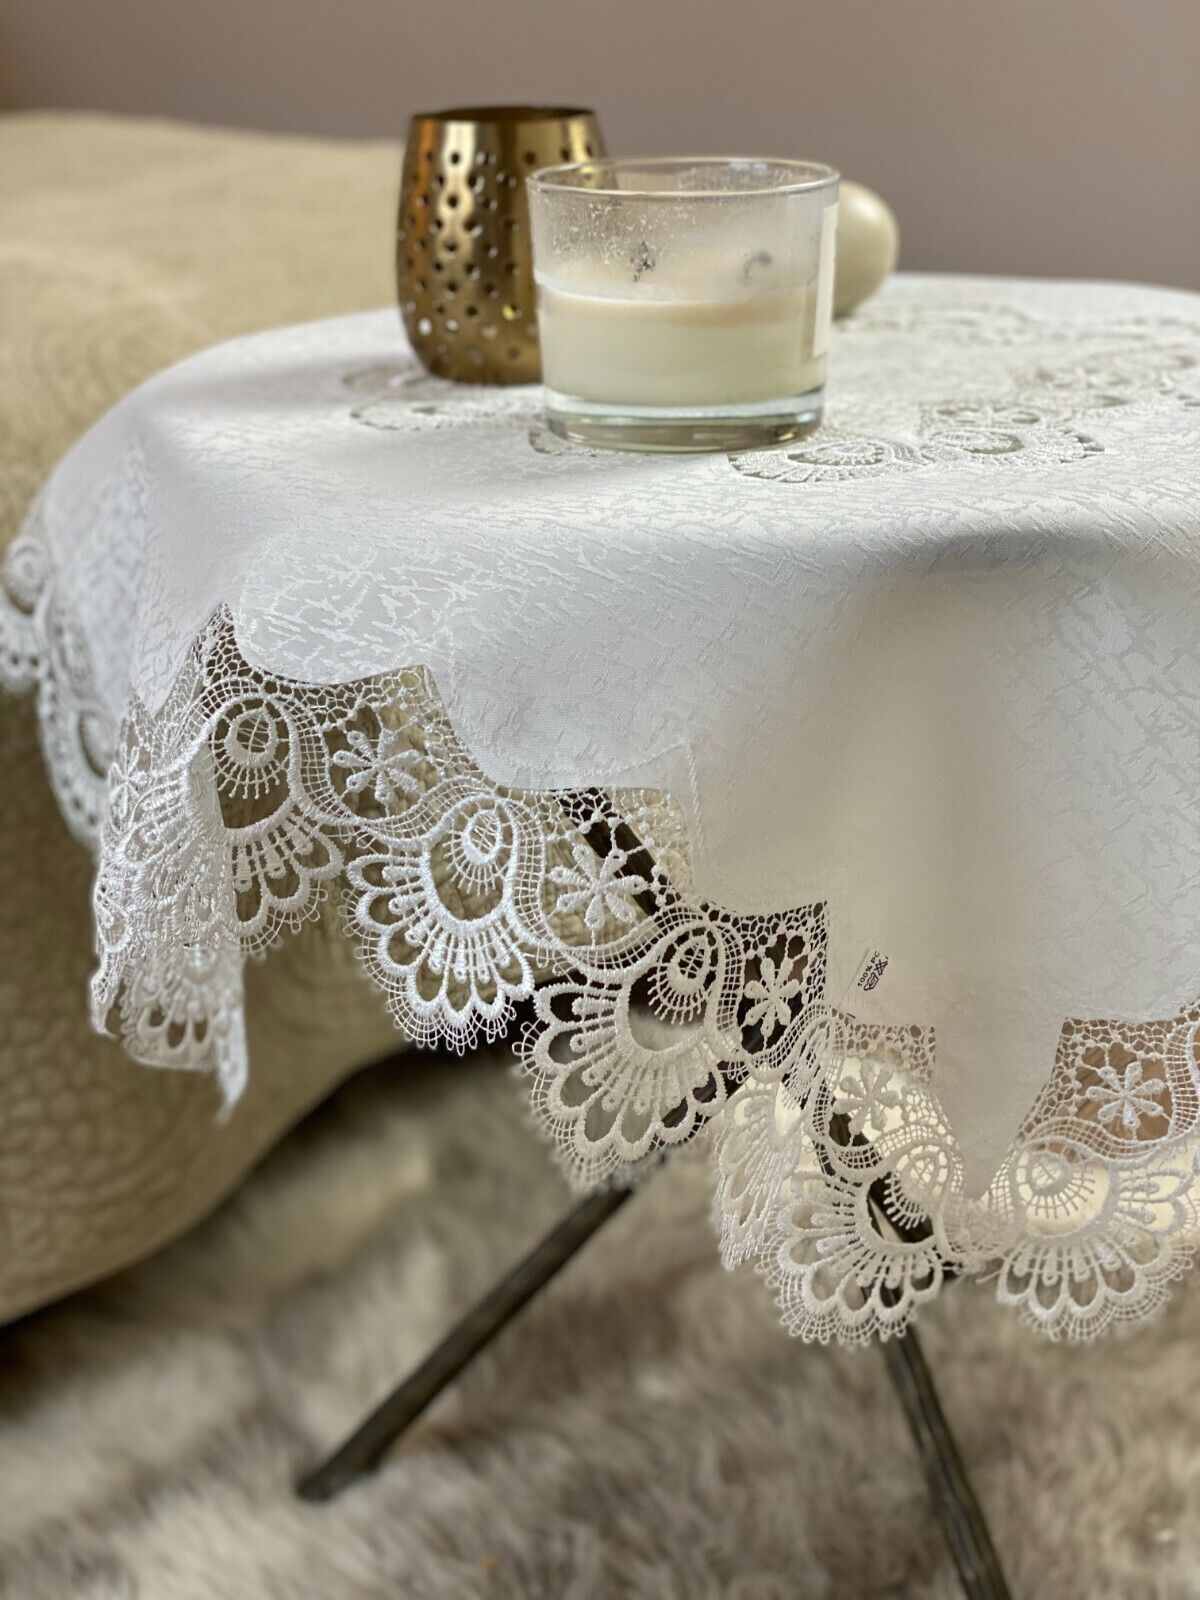 Macrame Lace While Tablecloth